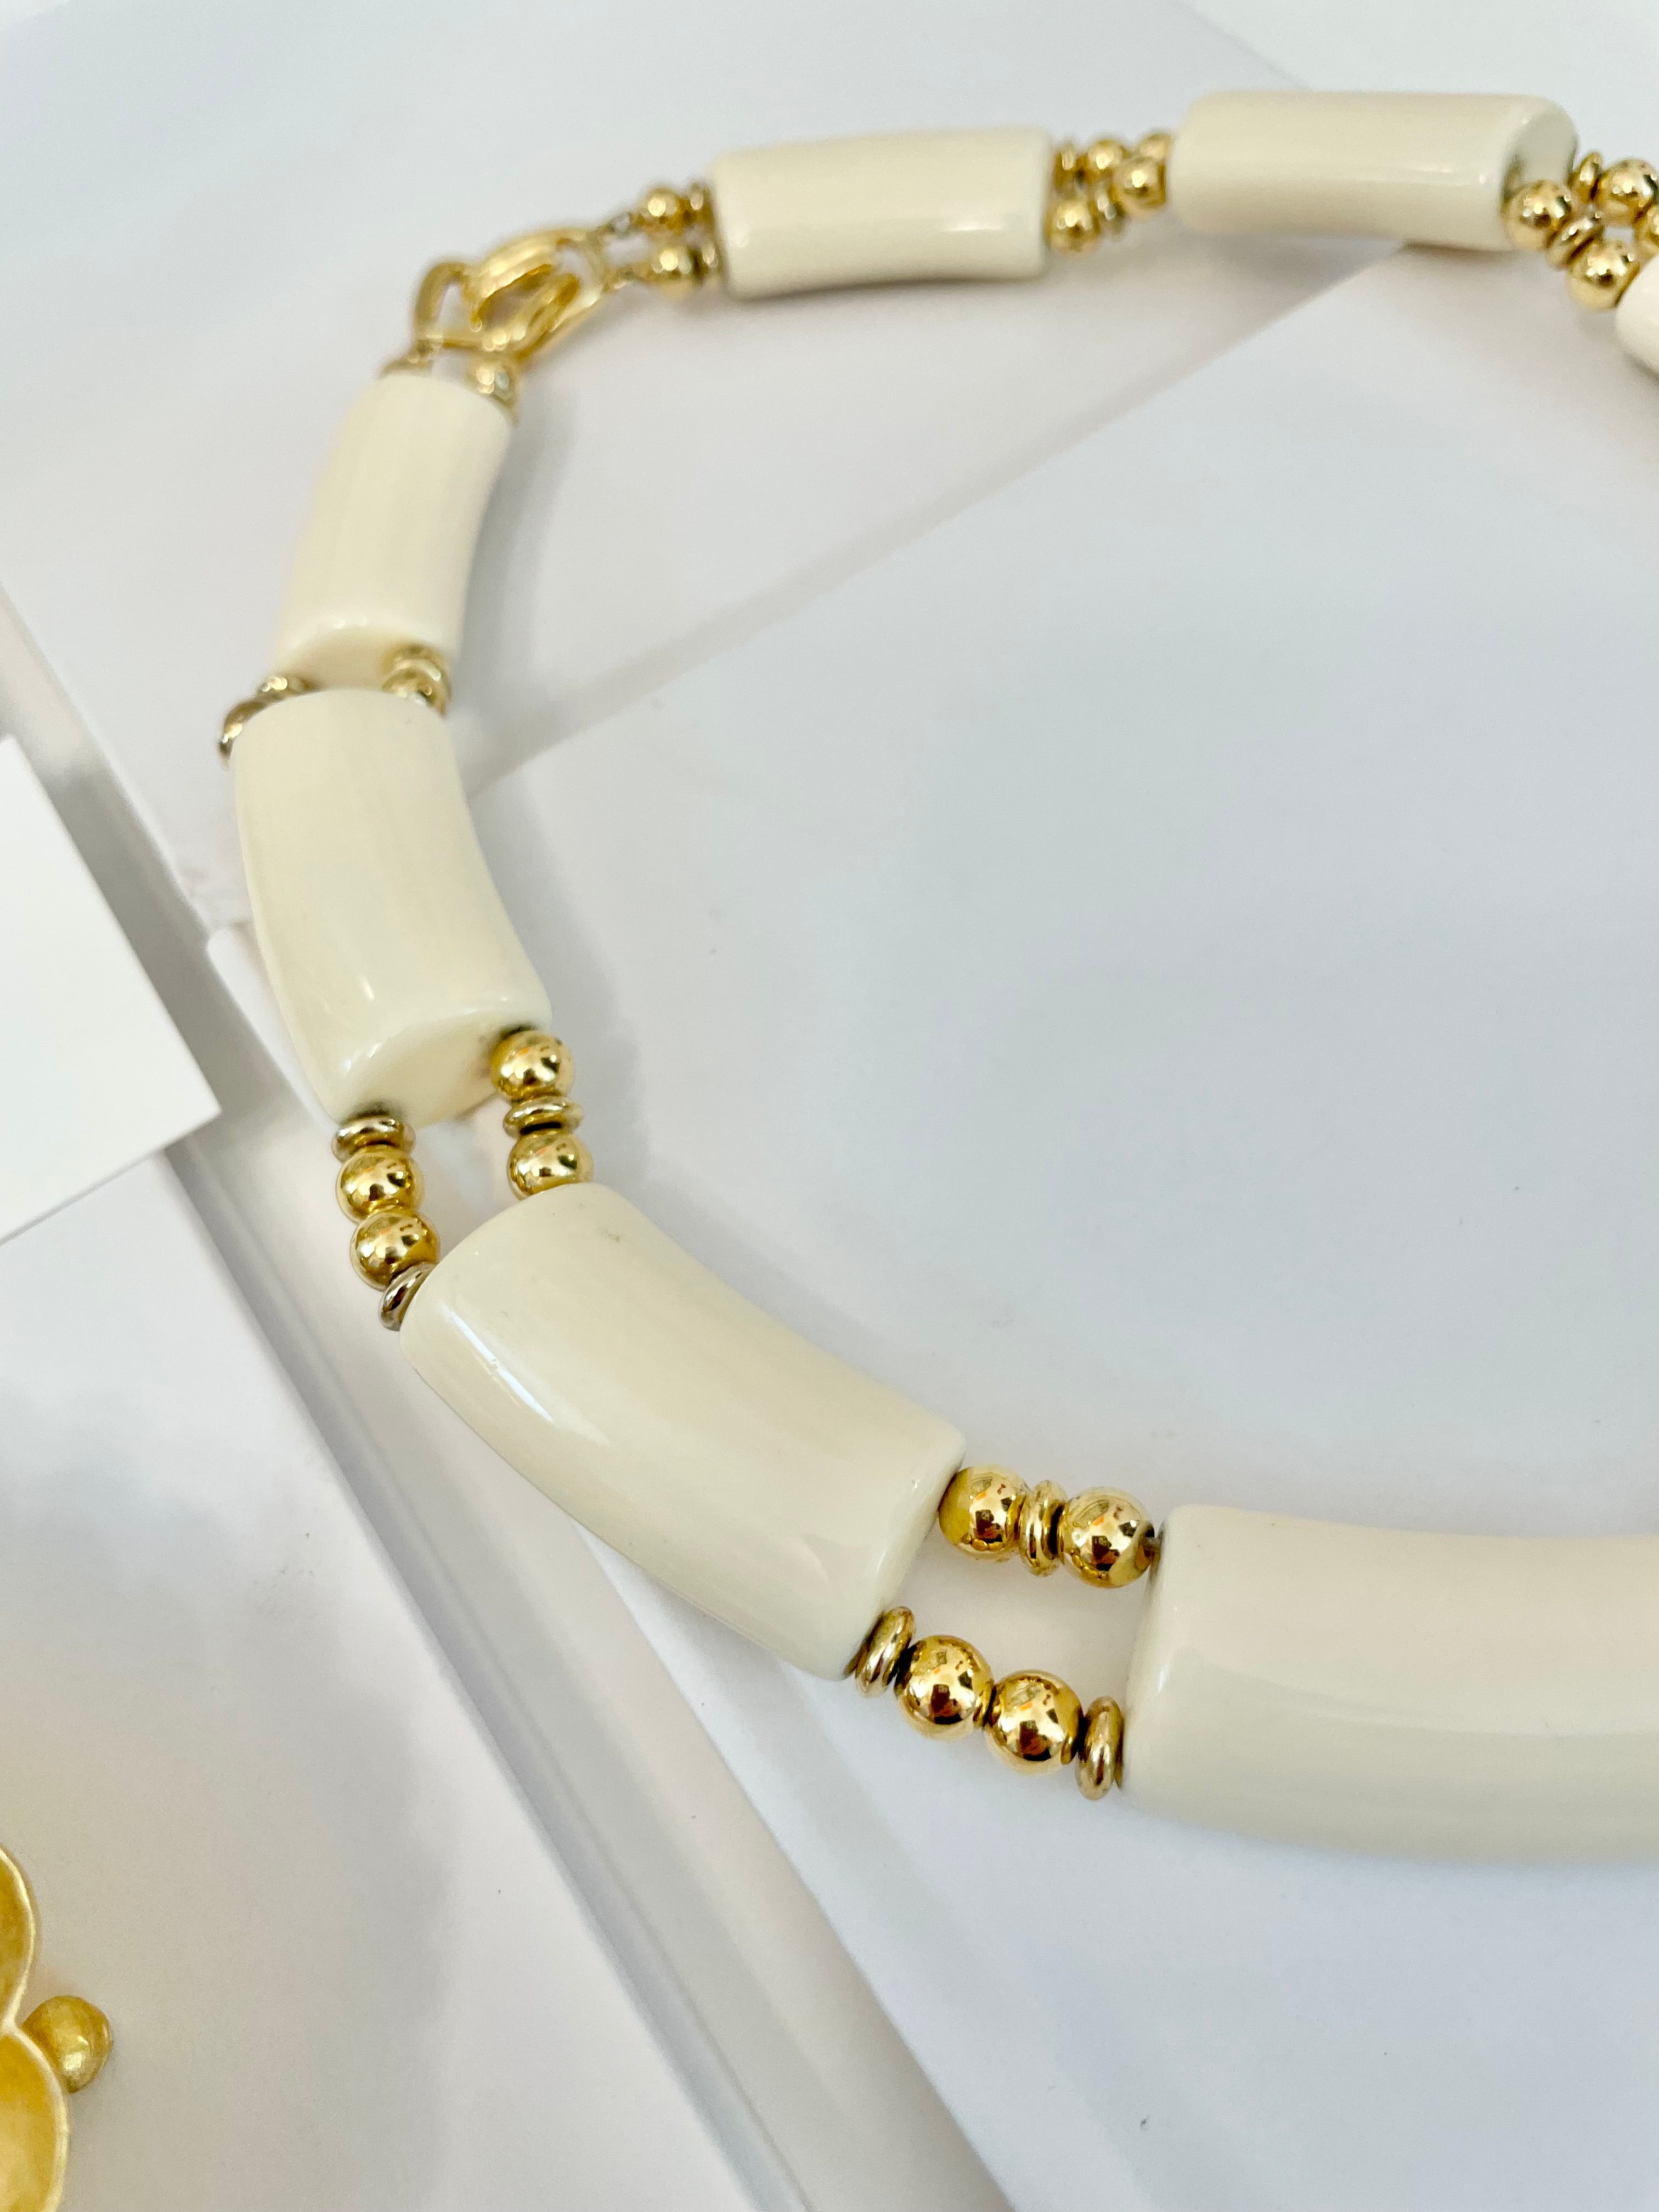 The Socialite loves a classic necklace... this ivory resin, and gold bead collar necklace is truly classy, and chic